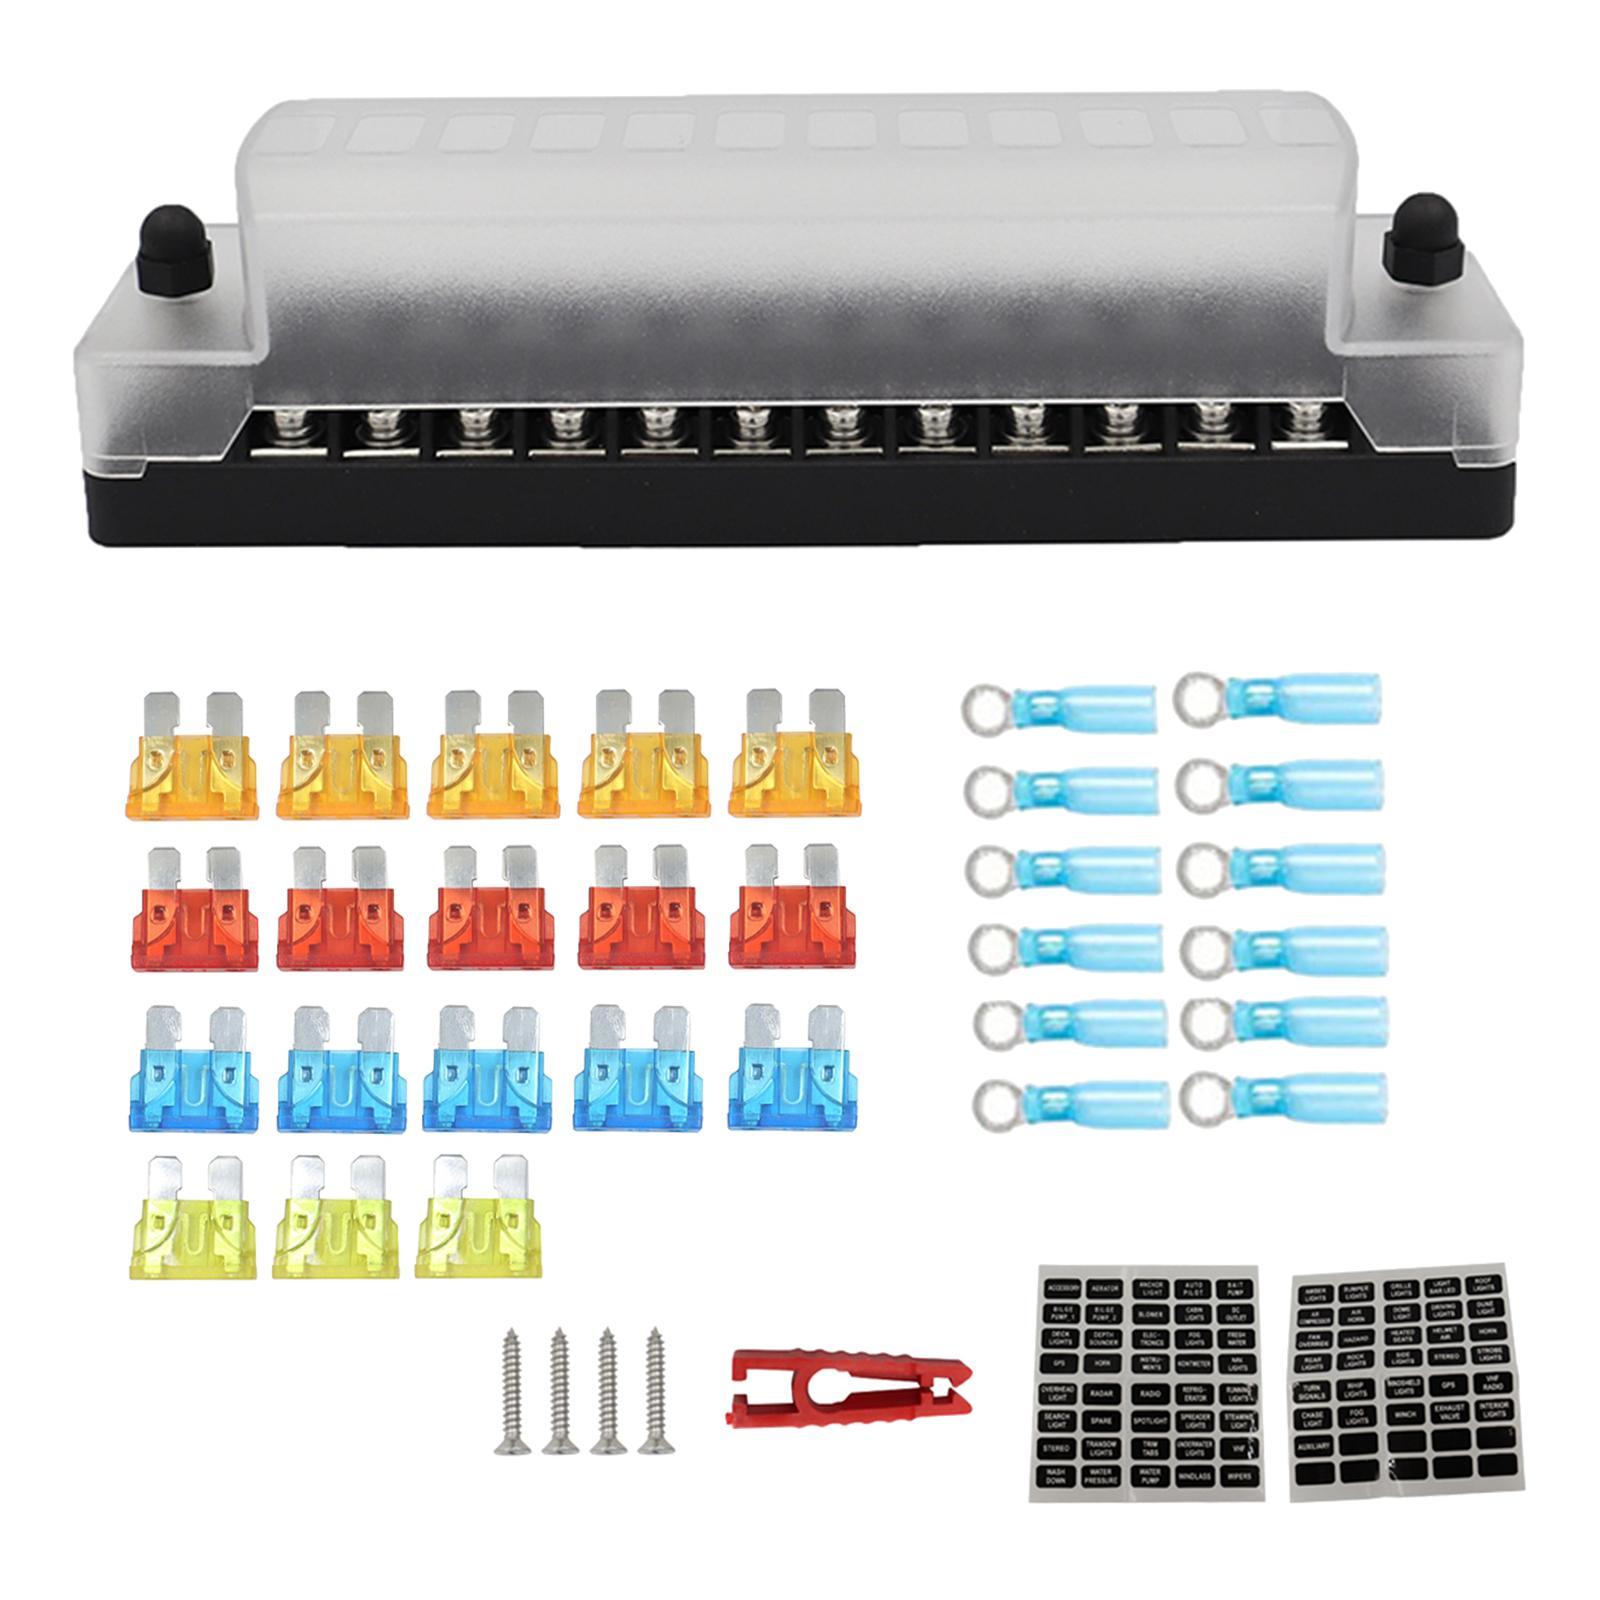 12-Way Blade Fuse Block 12-32V Fuse Box Holder for Automotive Car Style D